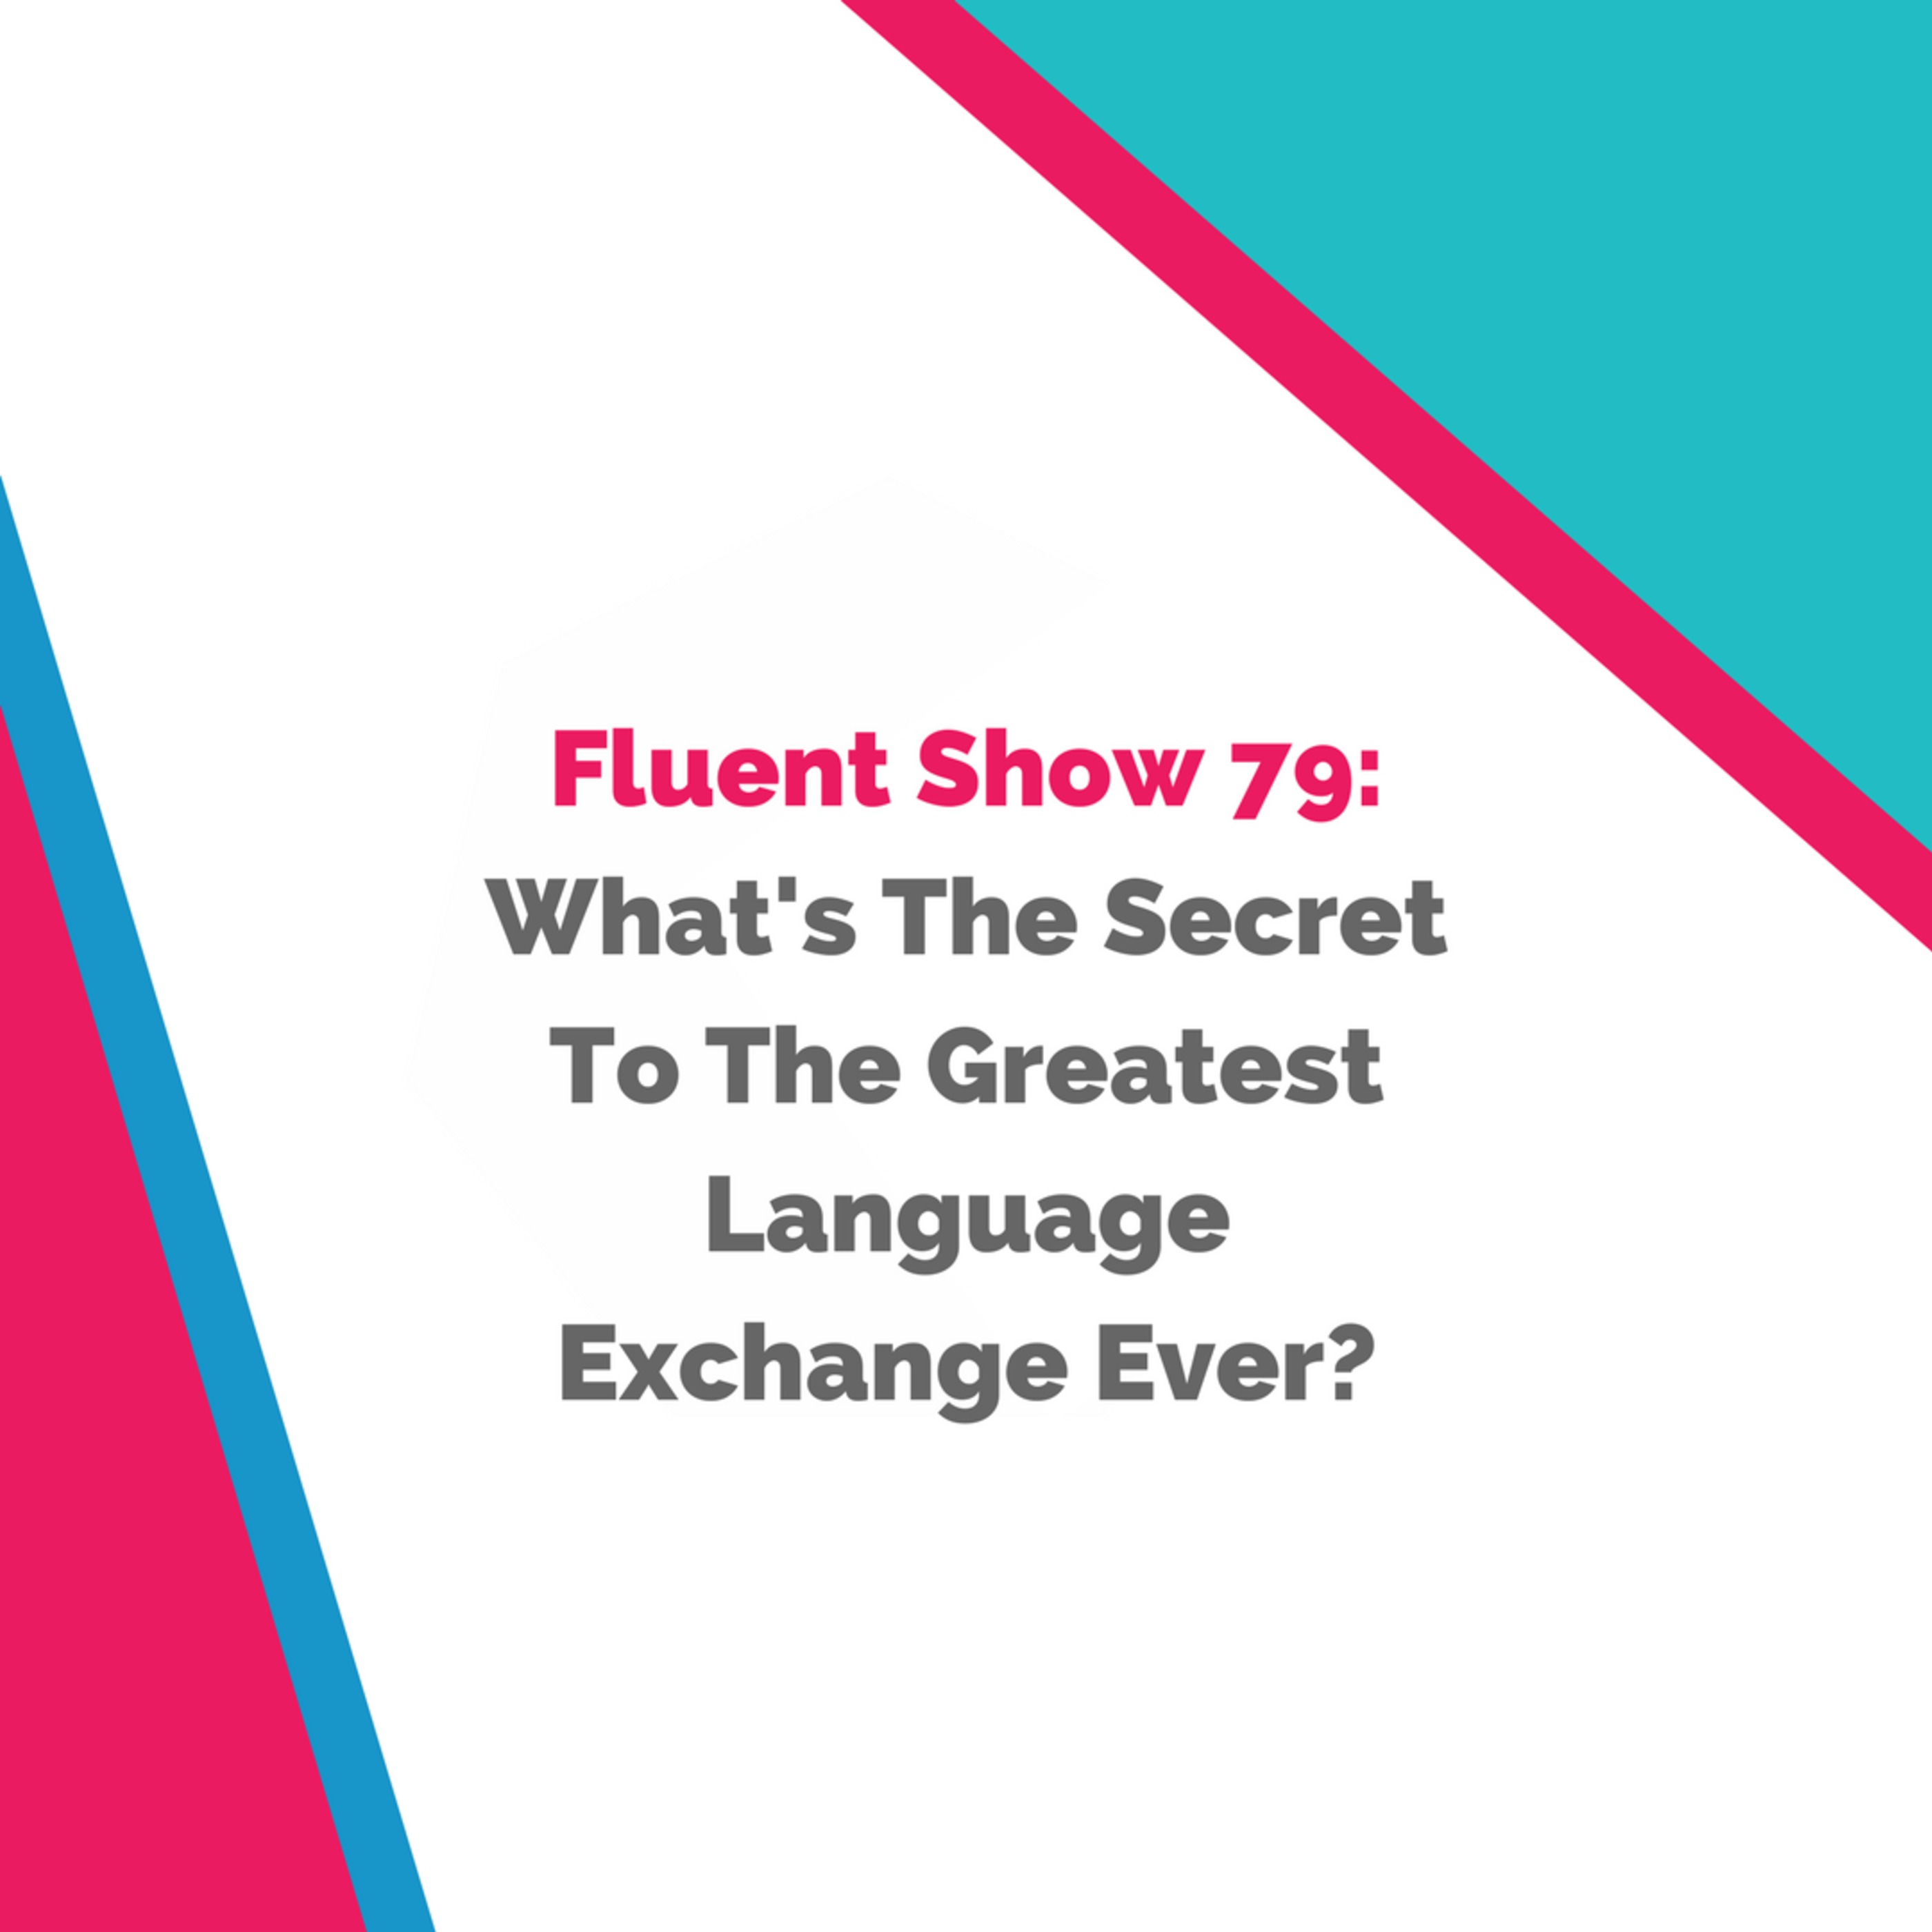 What’s The Secret To The Greatest Language Exchange Ever?